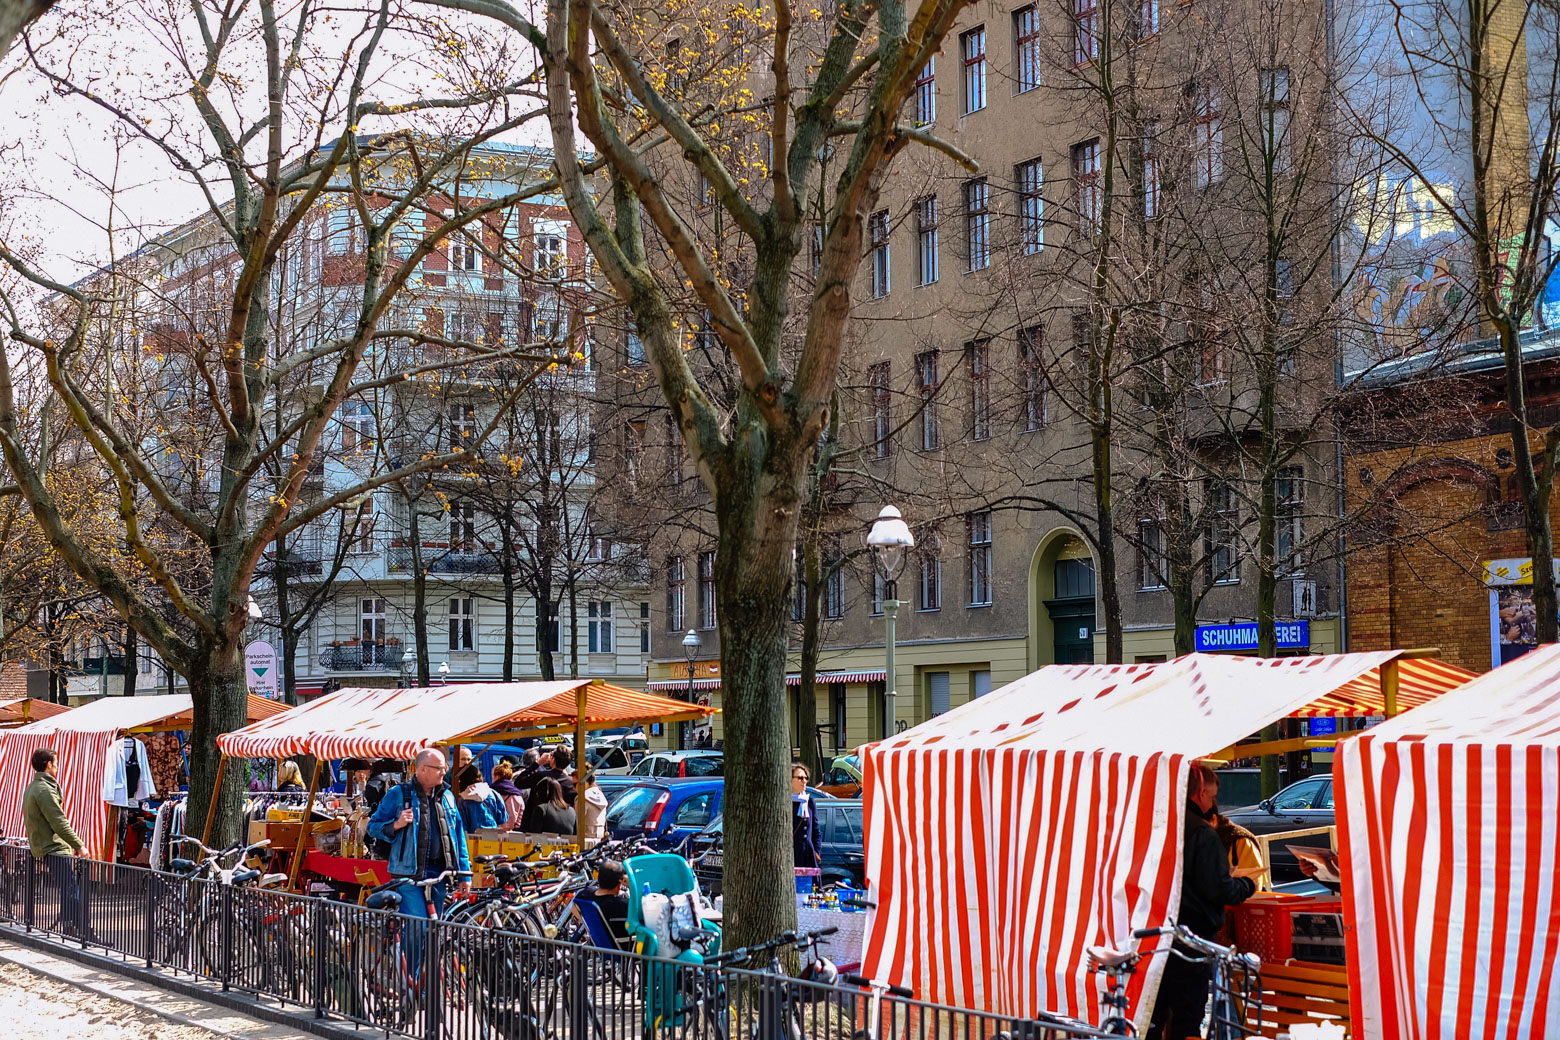 50 Things to do in Berlin (as told by locals): Berlin is more than monuments and landmarks, it's a way of life!